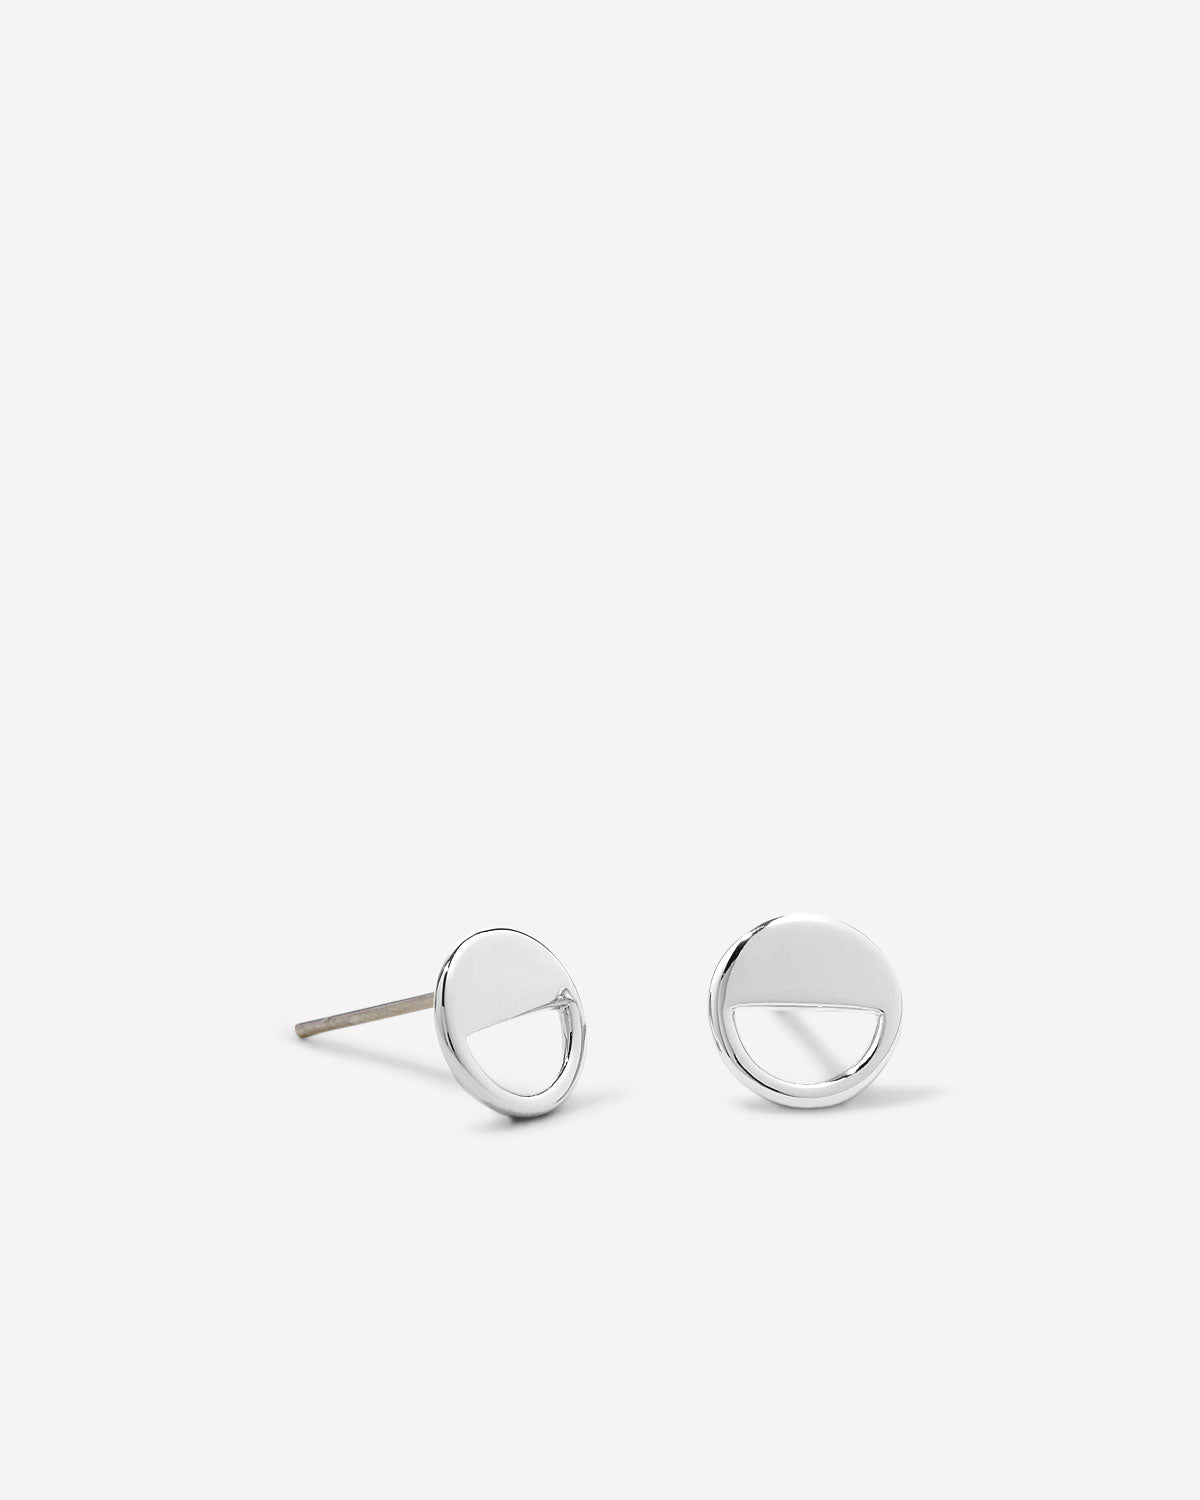 One Door Closes Stud Earrings in silver finish